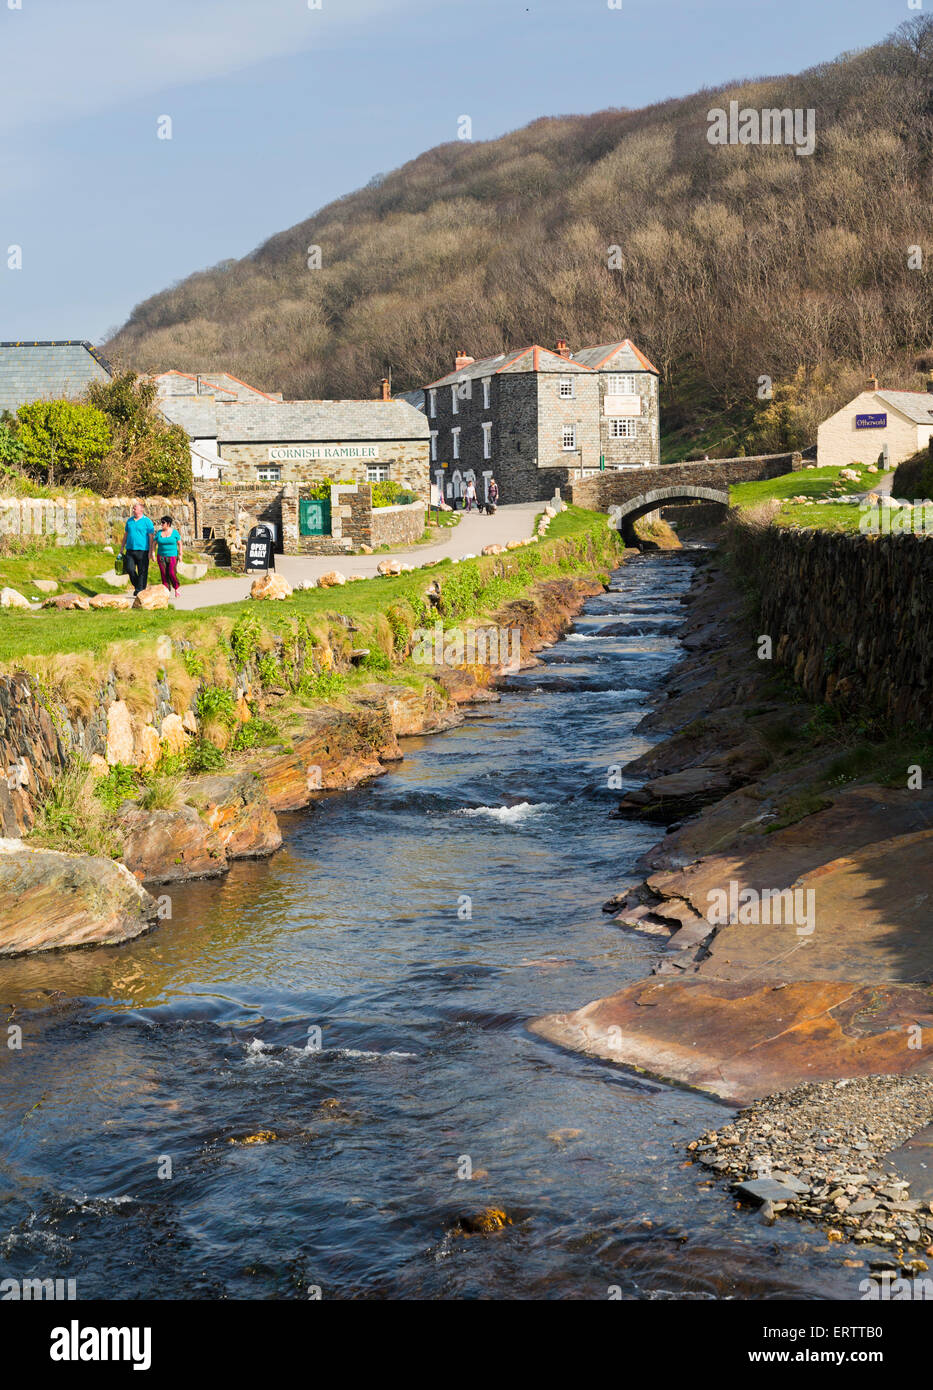 Tourists walking banks of River Valency in the village of Boscastle, Cornwall, England, UK Stock Photo